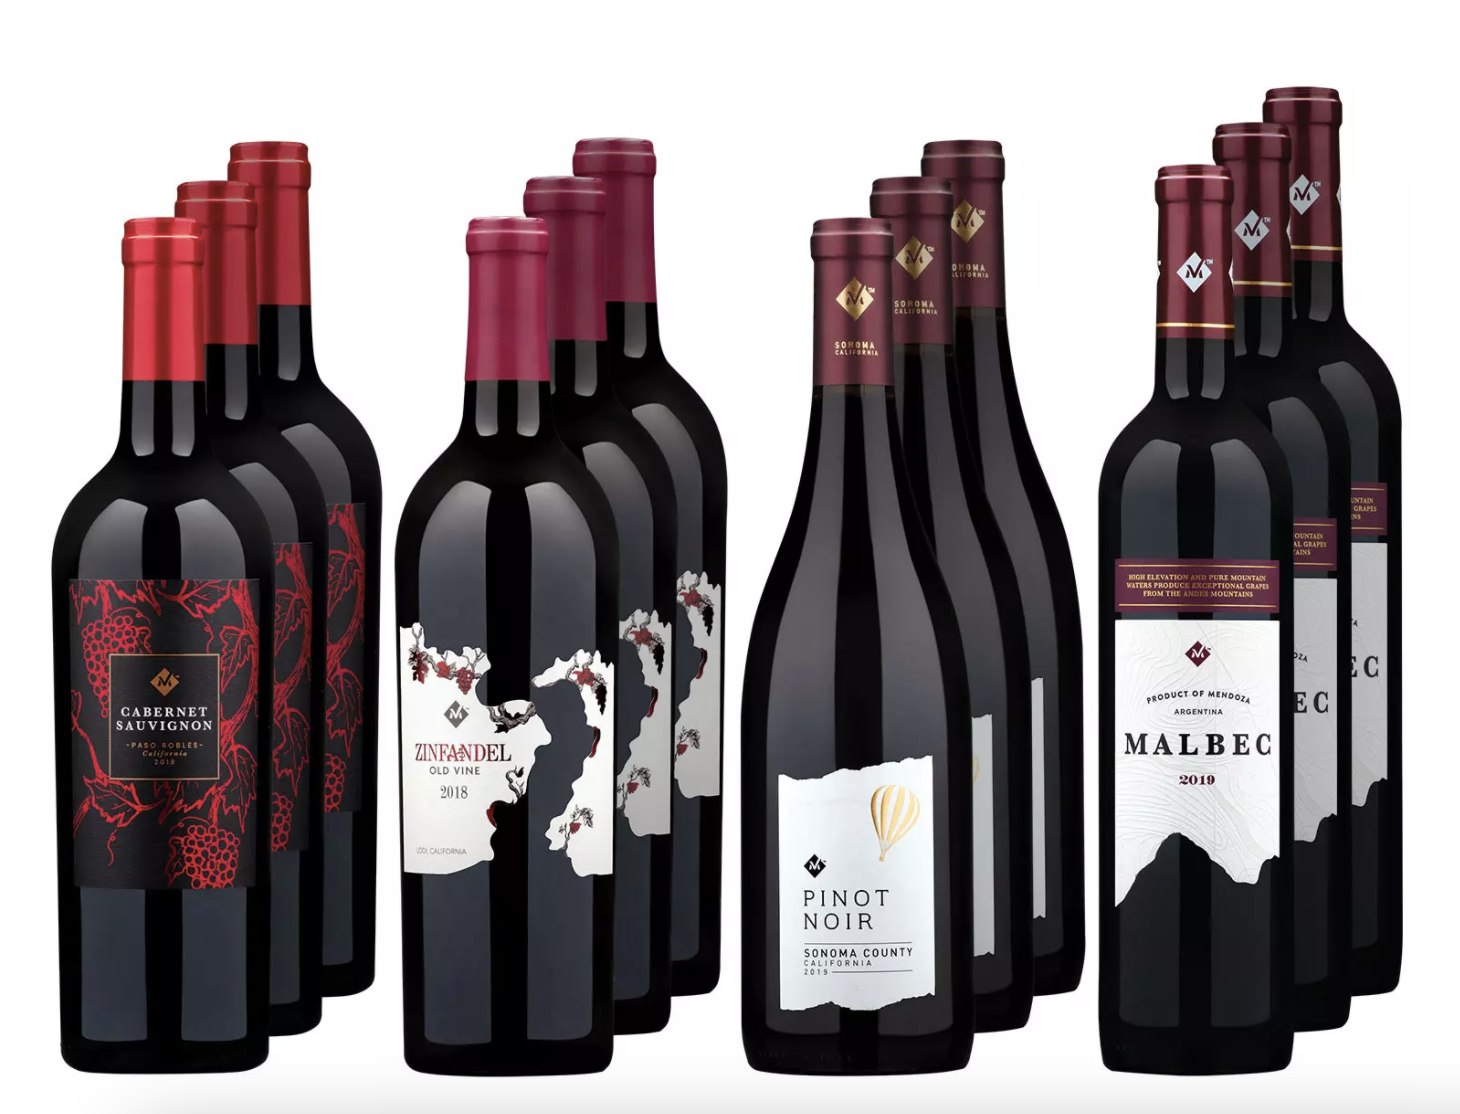 Sam's Club joins with Drinks to offer home wine delivery | Supermarket News